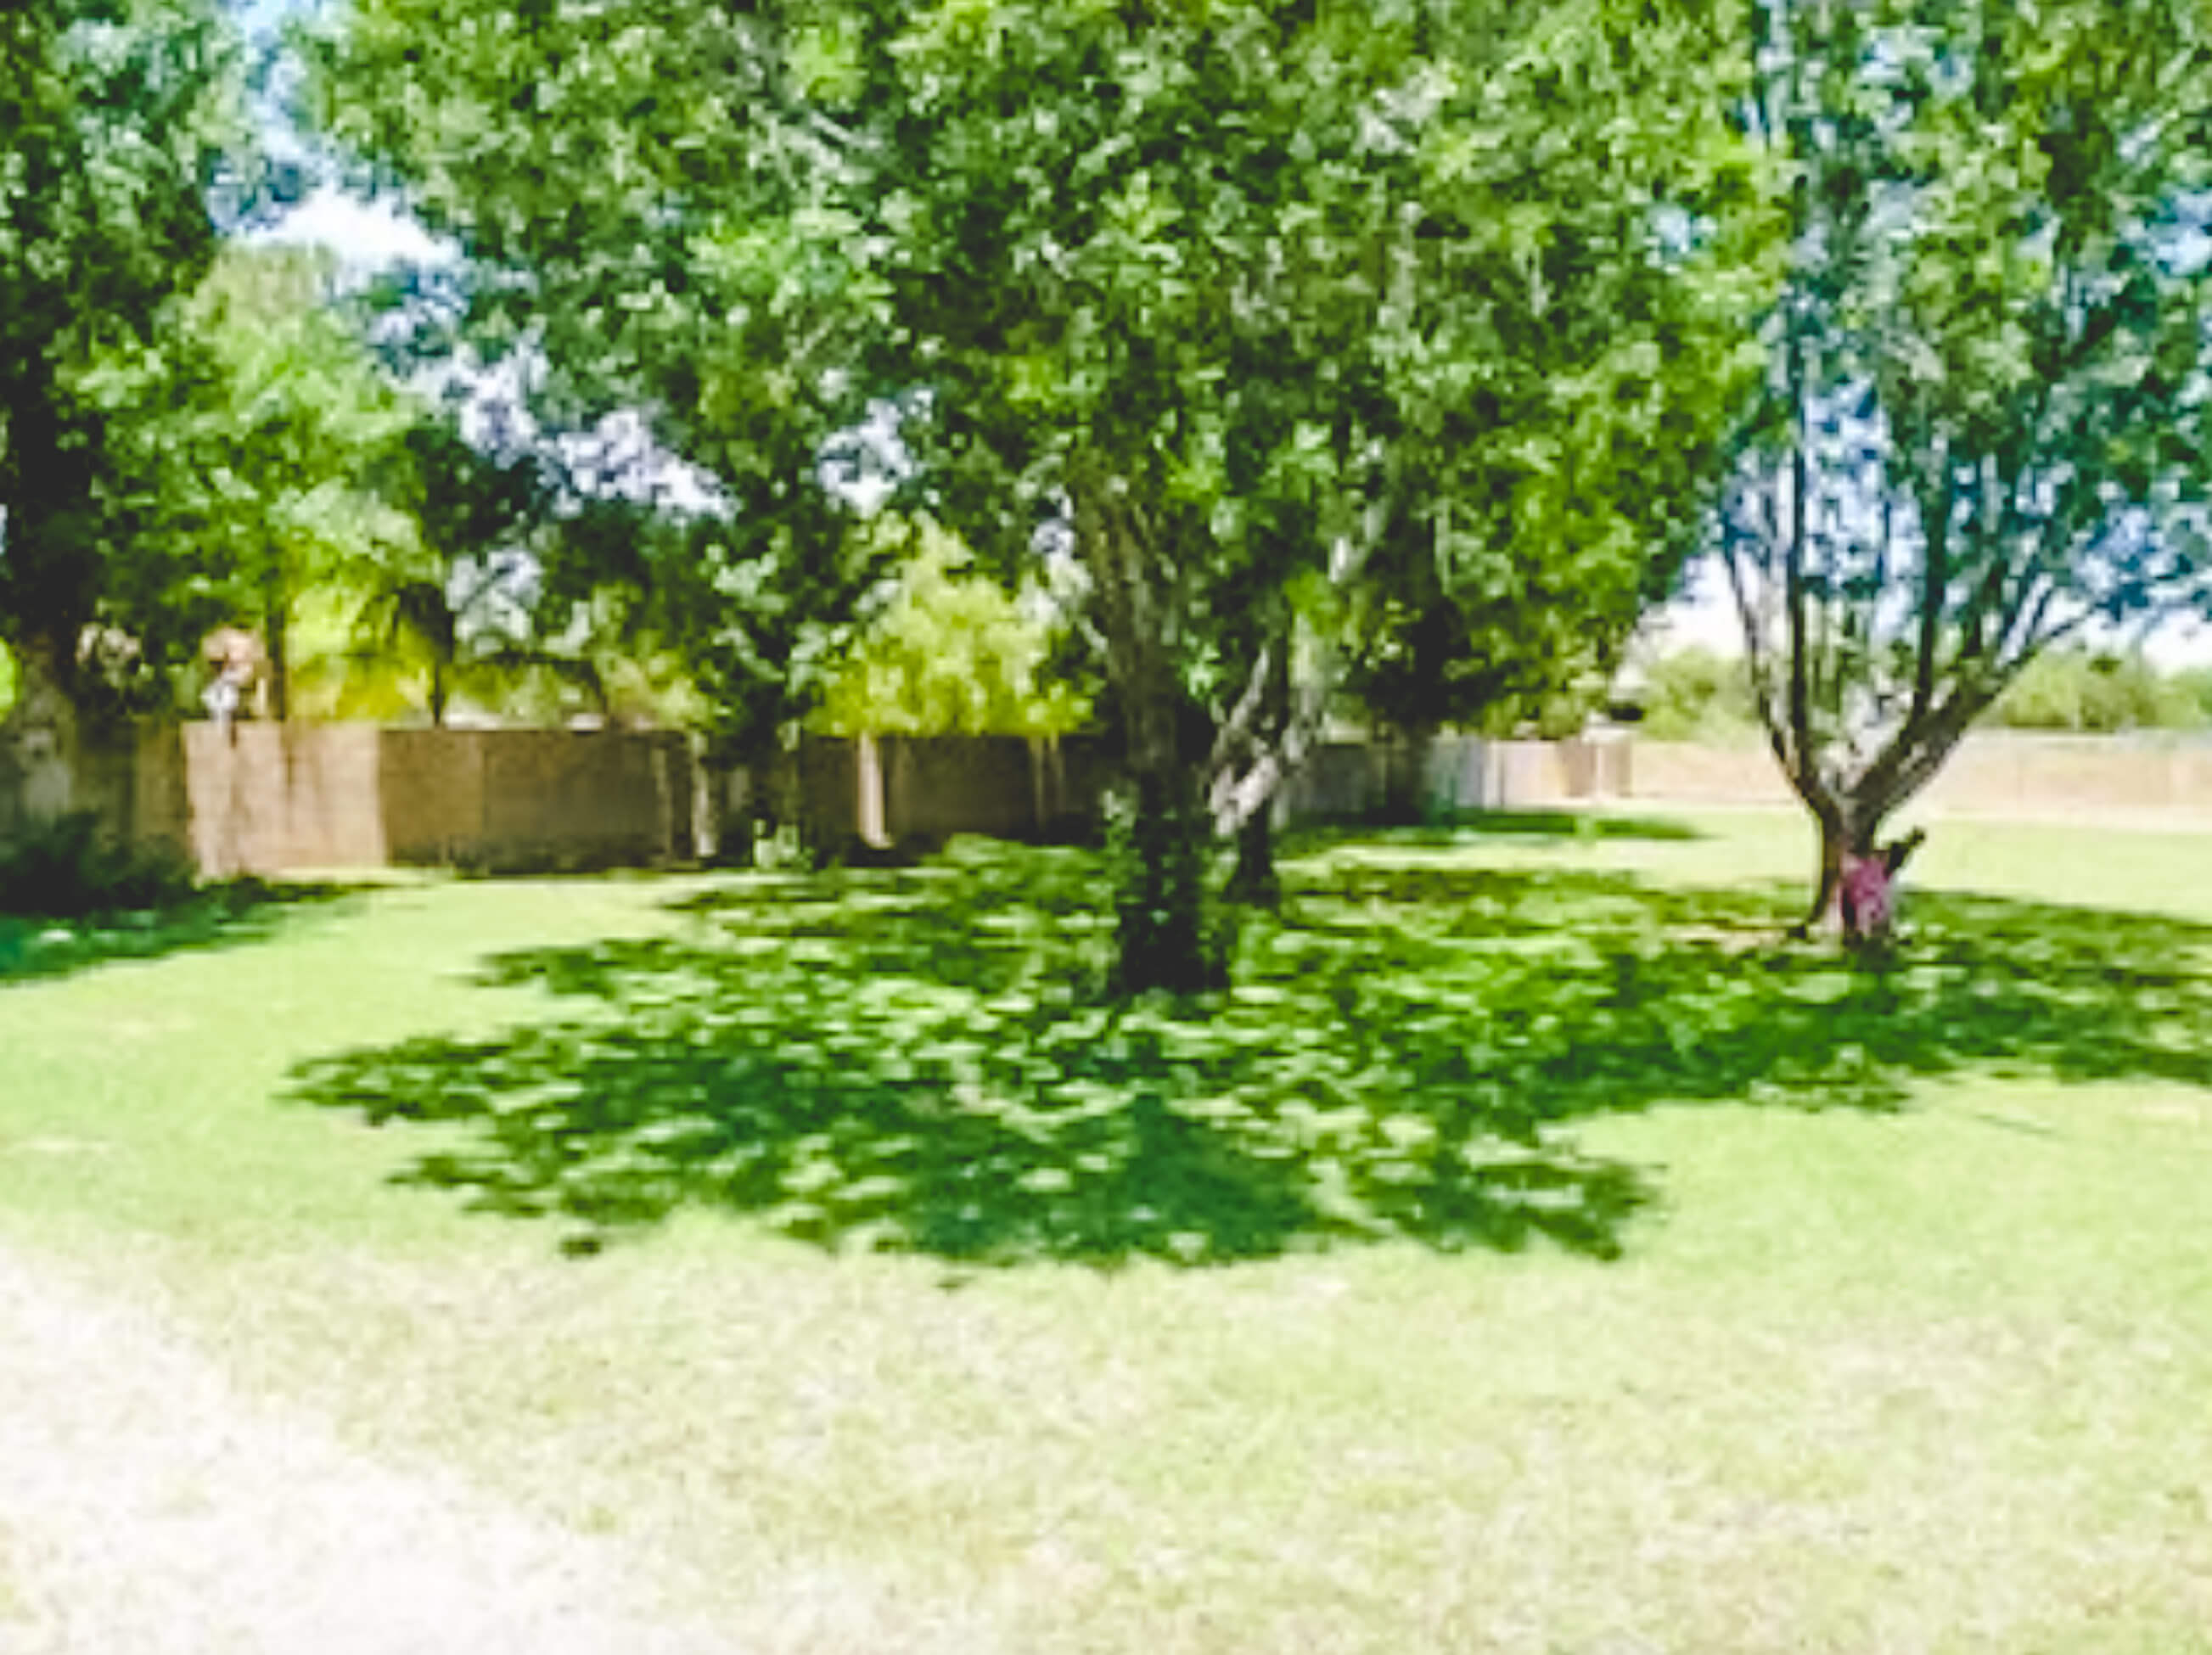 Mesquite and Cottonwood trees in large backyard.